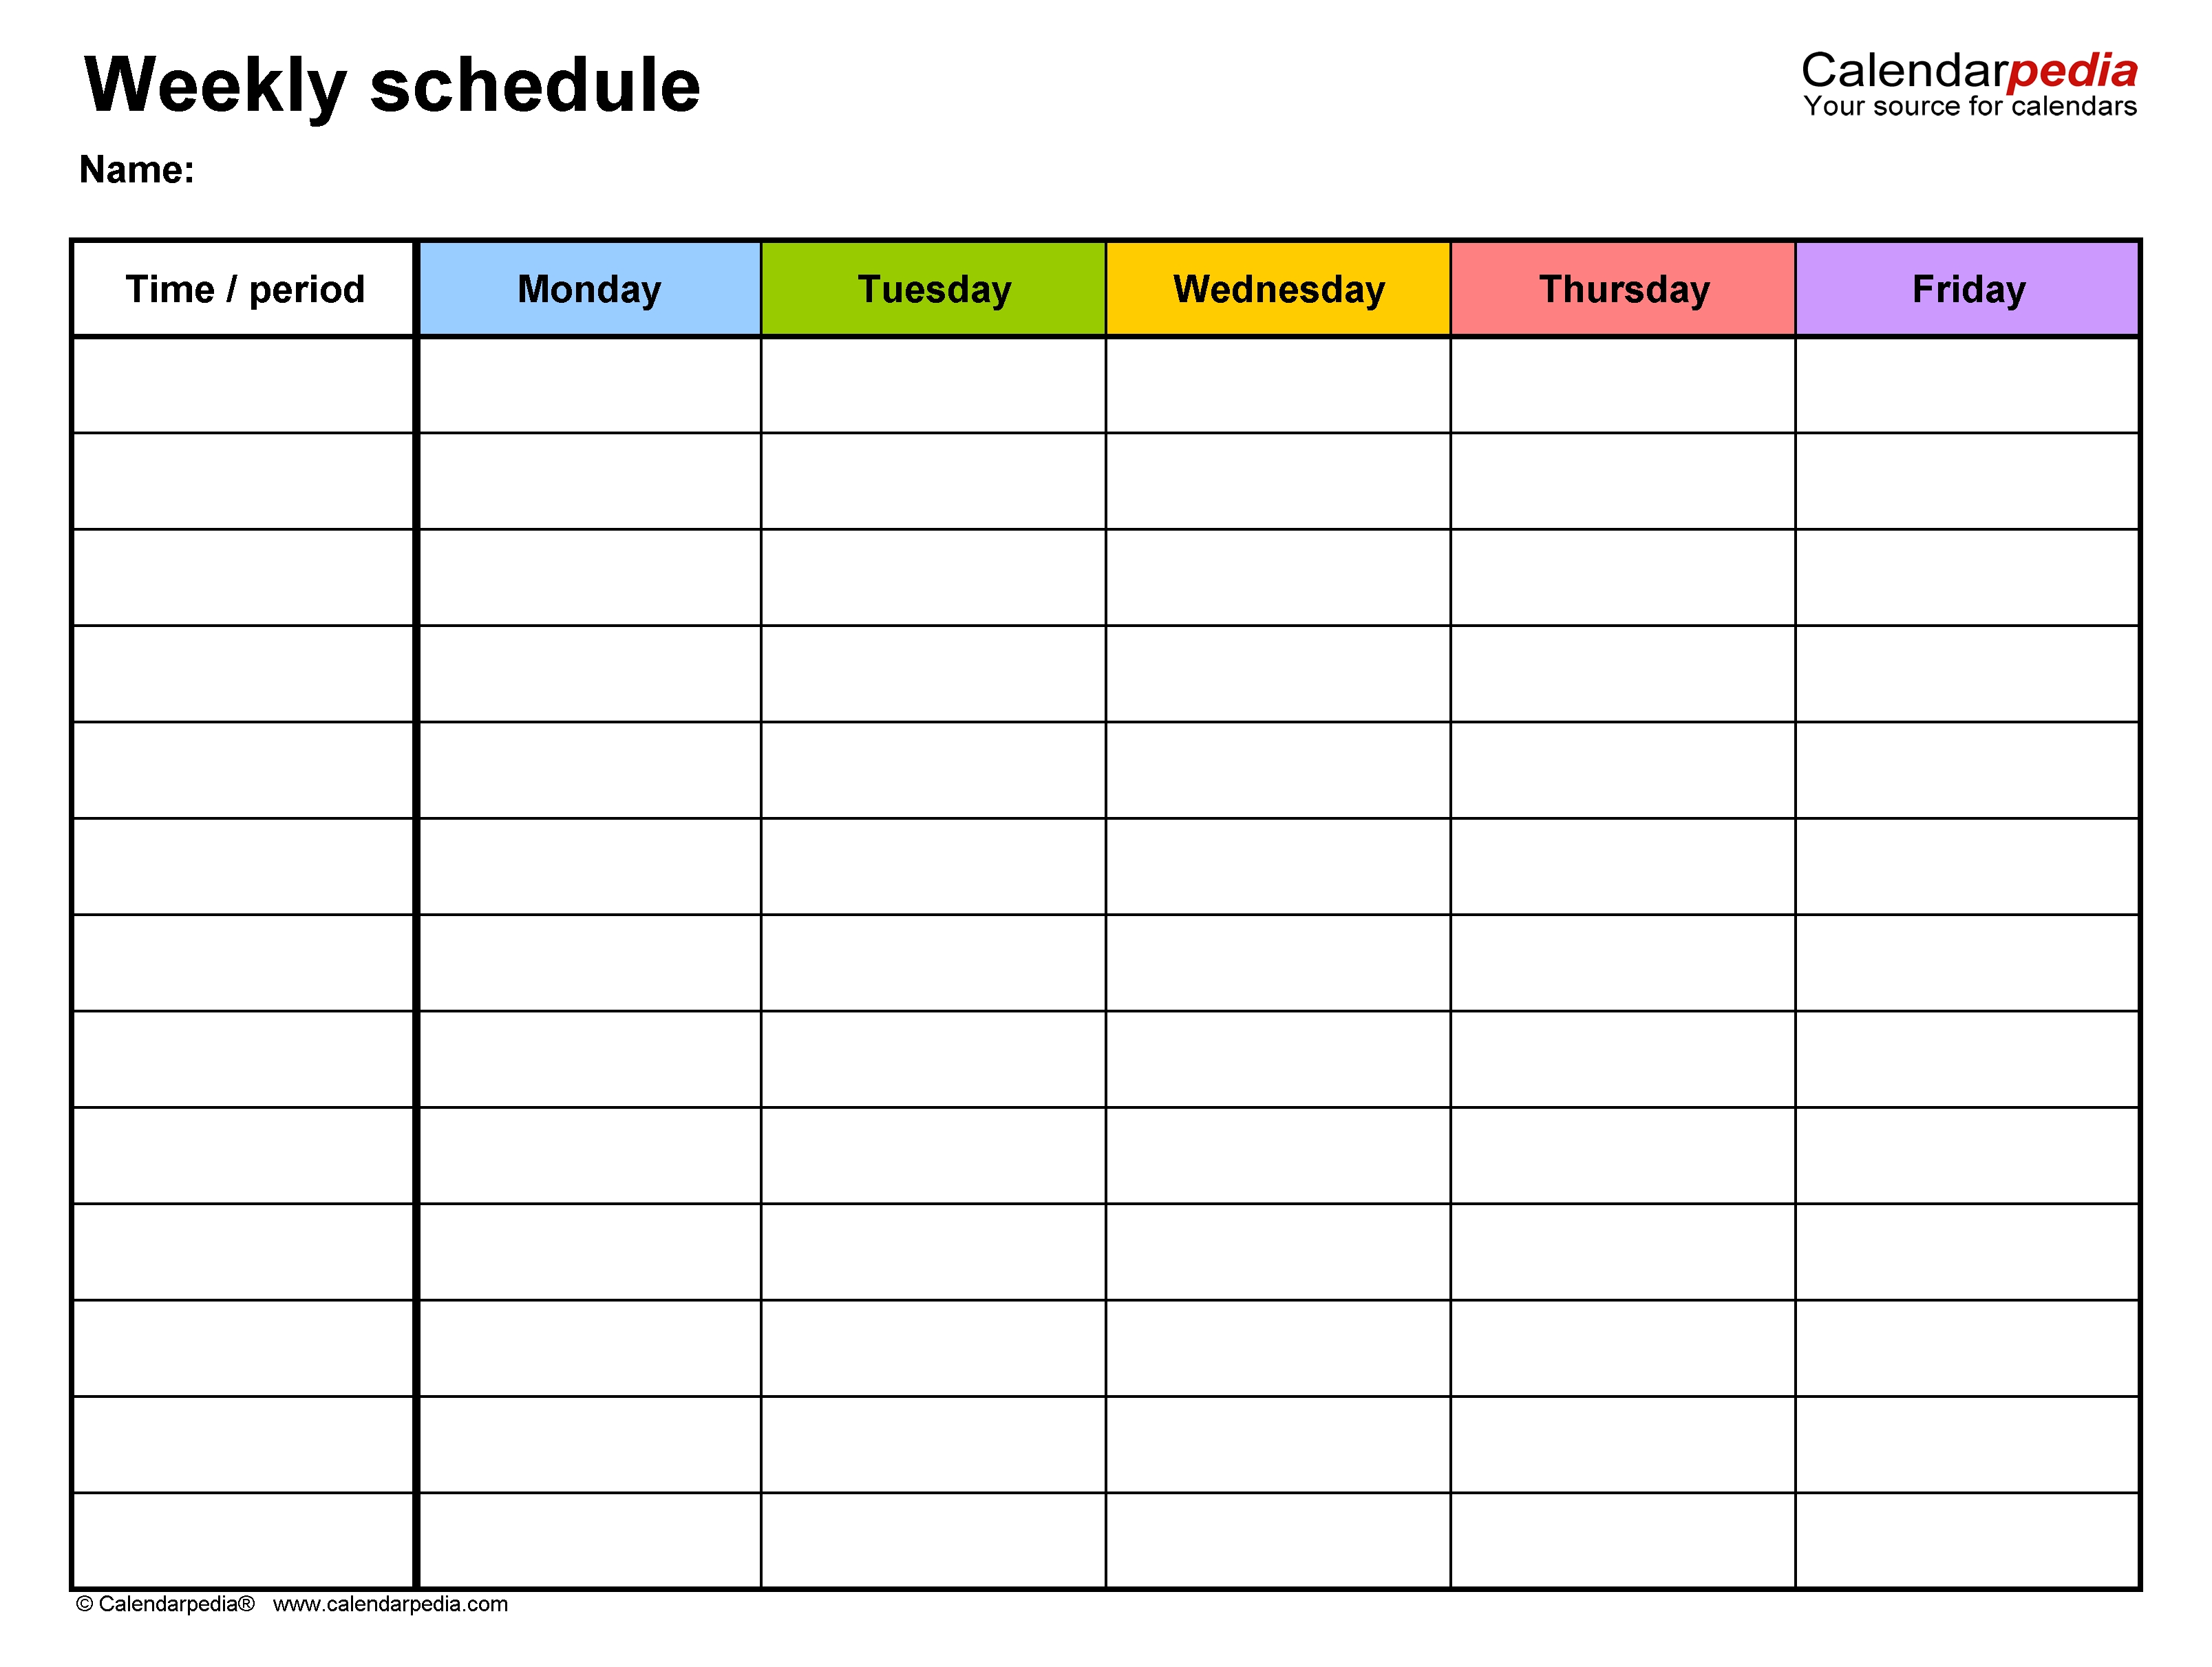 Free Weekly Schedule Templates For Excel - 18 Templates 5 Day Work Calendar Template